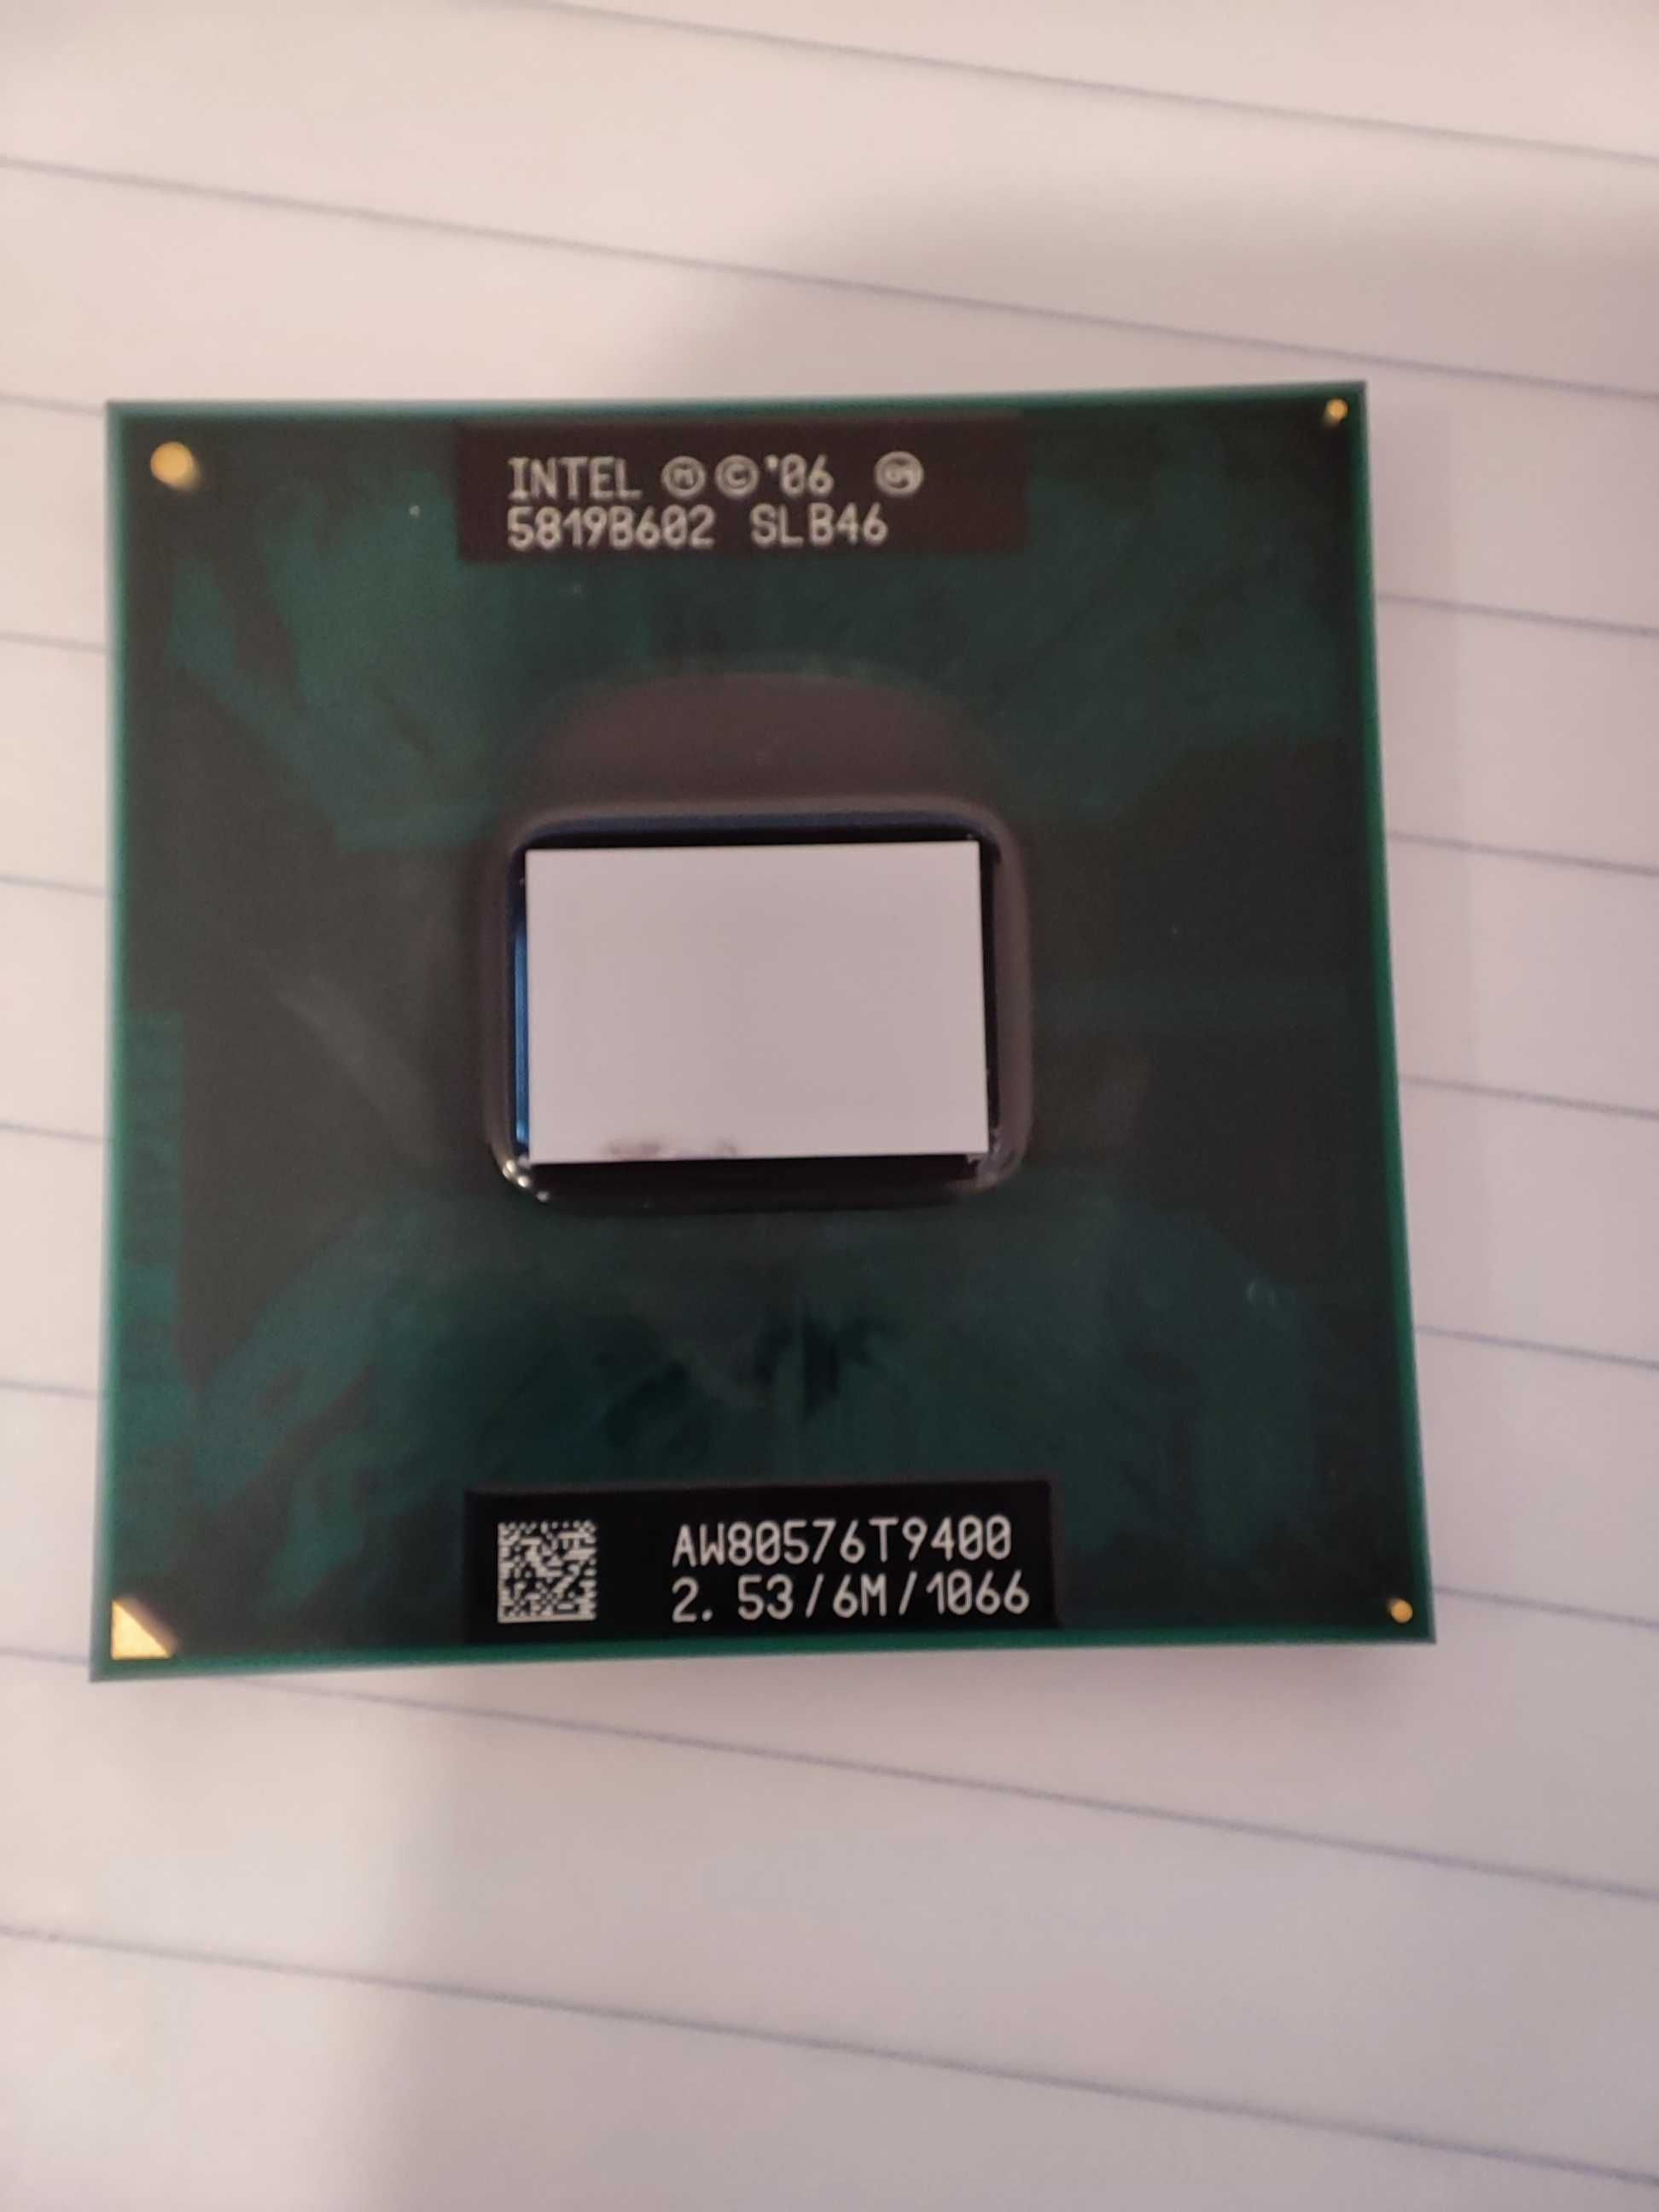 Intel Core 2 Duo Procesor T9400 2,53 GHz, 6mb Cache, 1066MHz FSB, Sk P